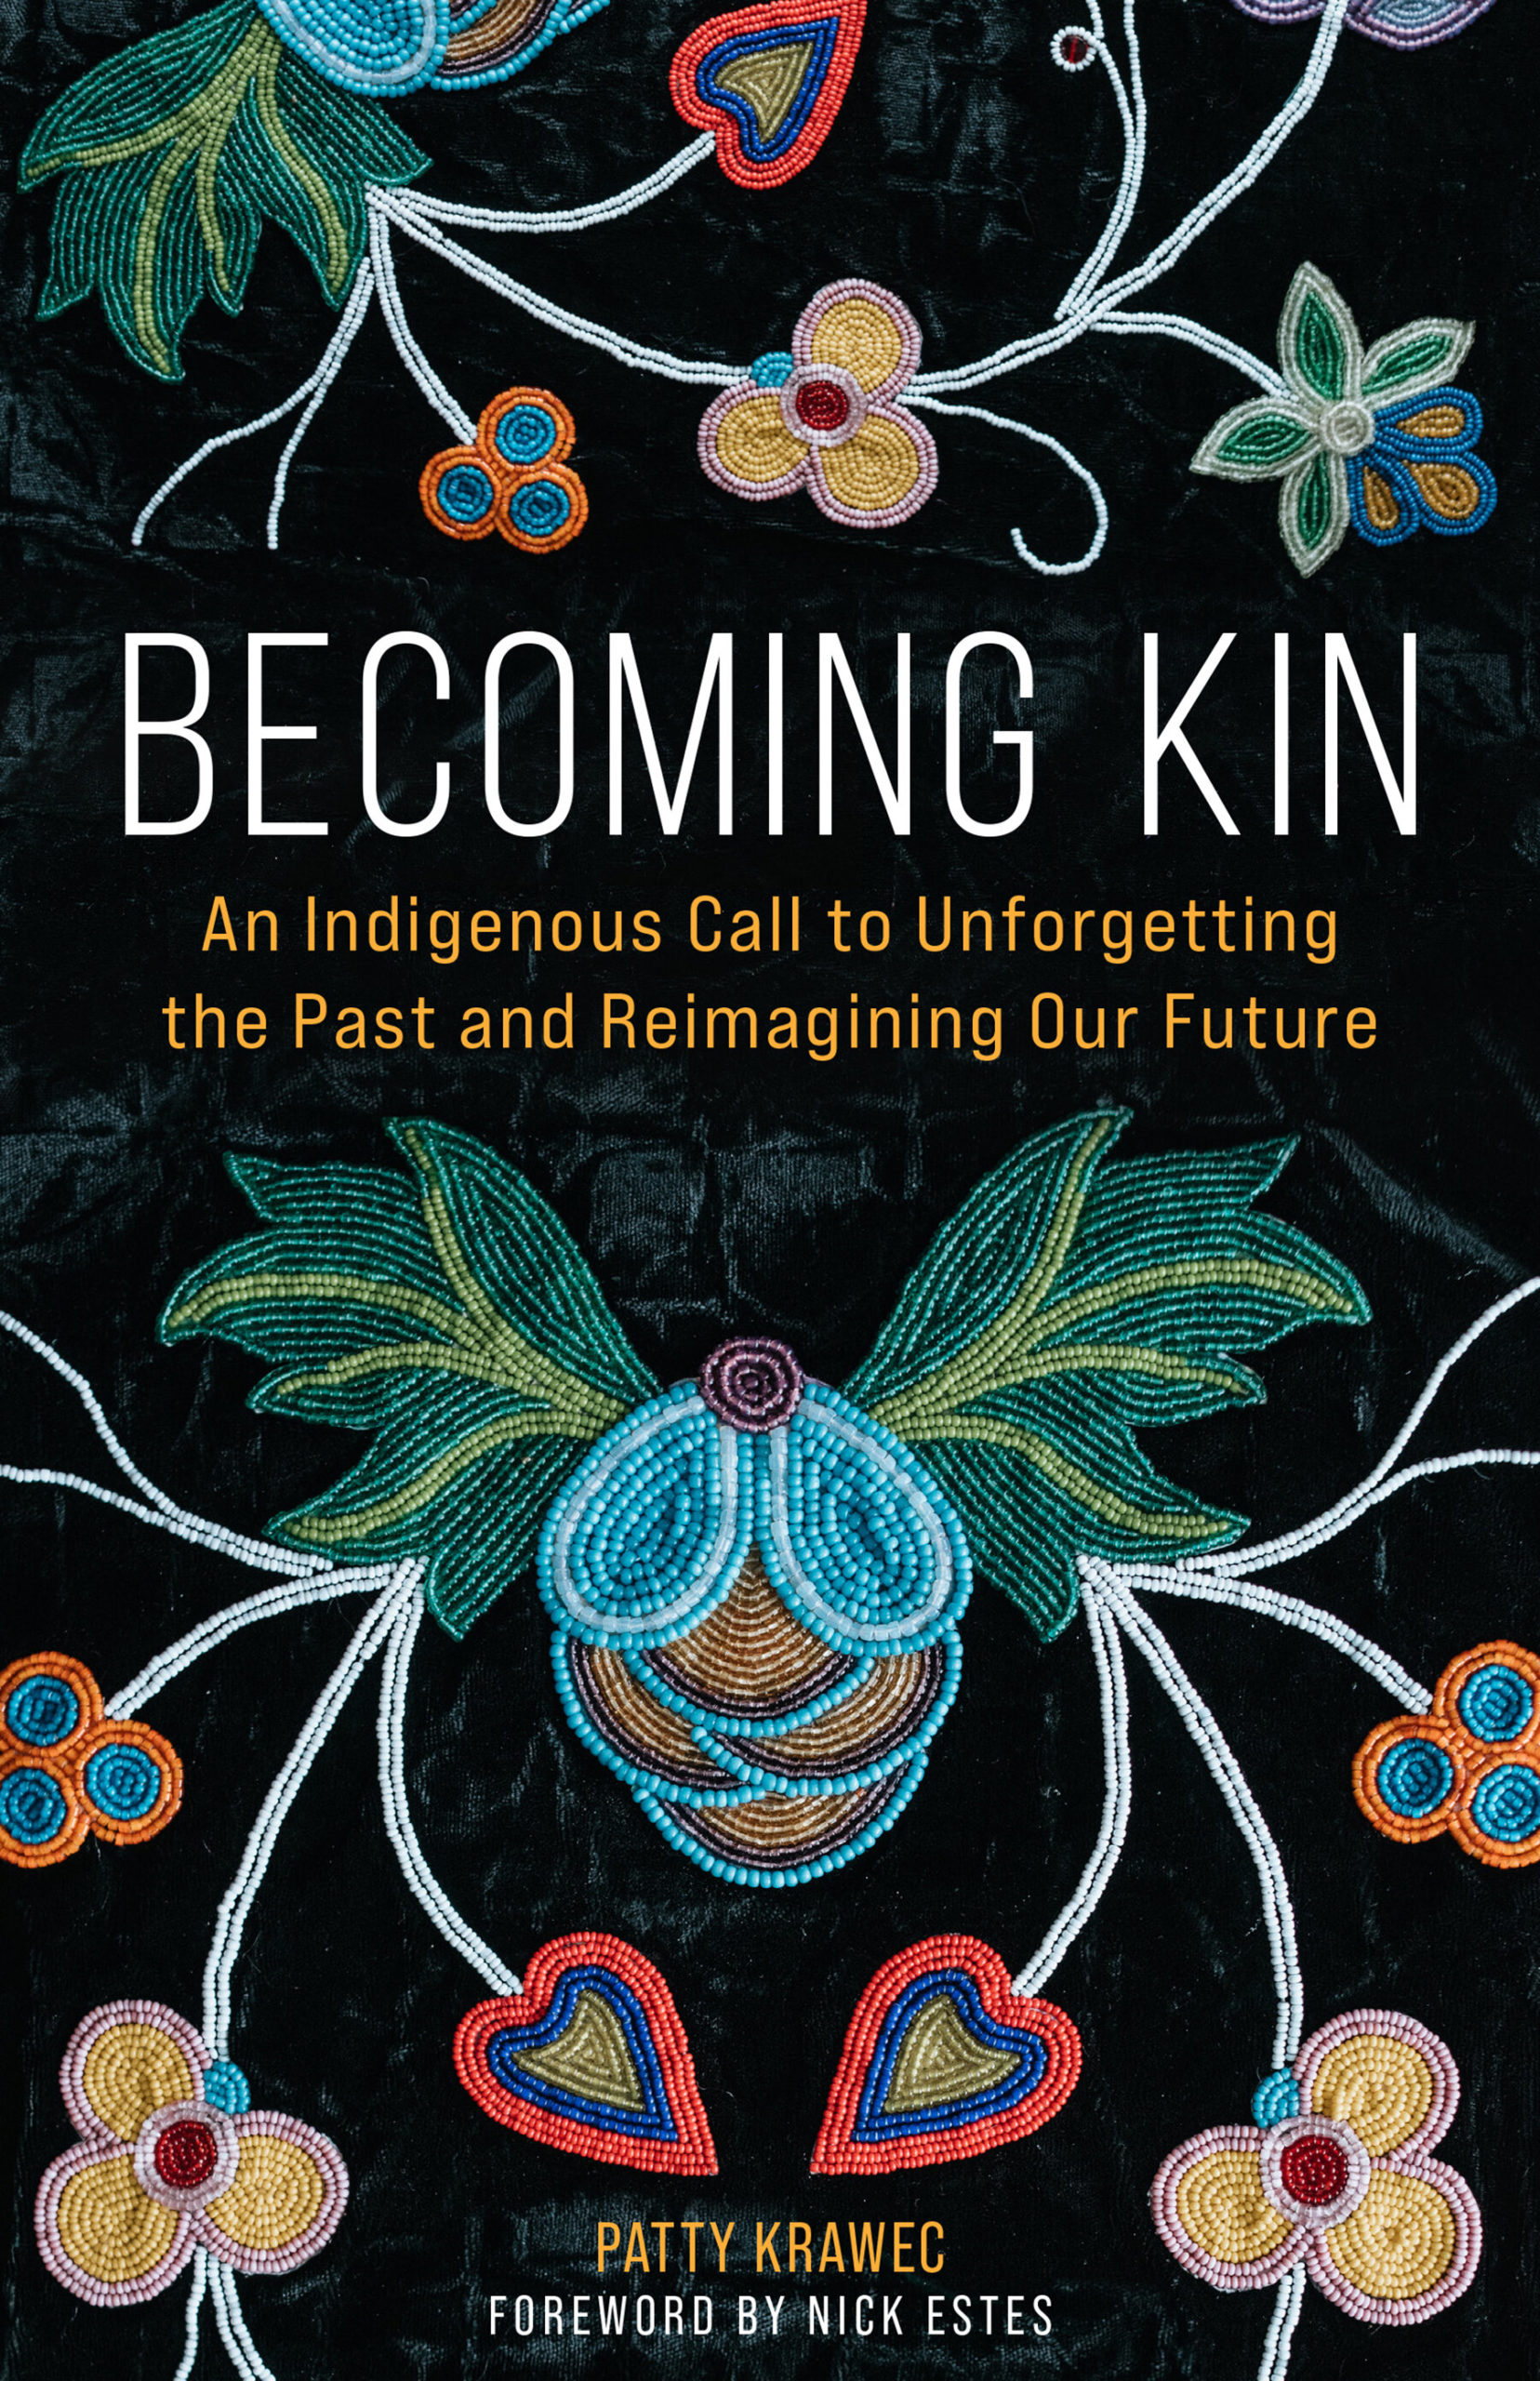 The book cover of Becoming Kin by Patty Krawec, with the same beadwork design as in the article's banner image.